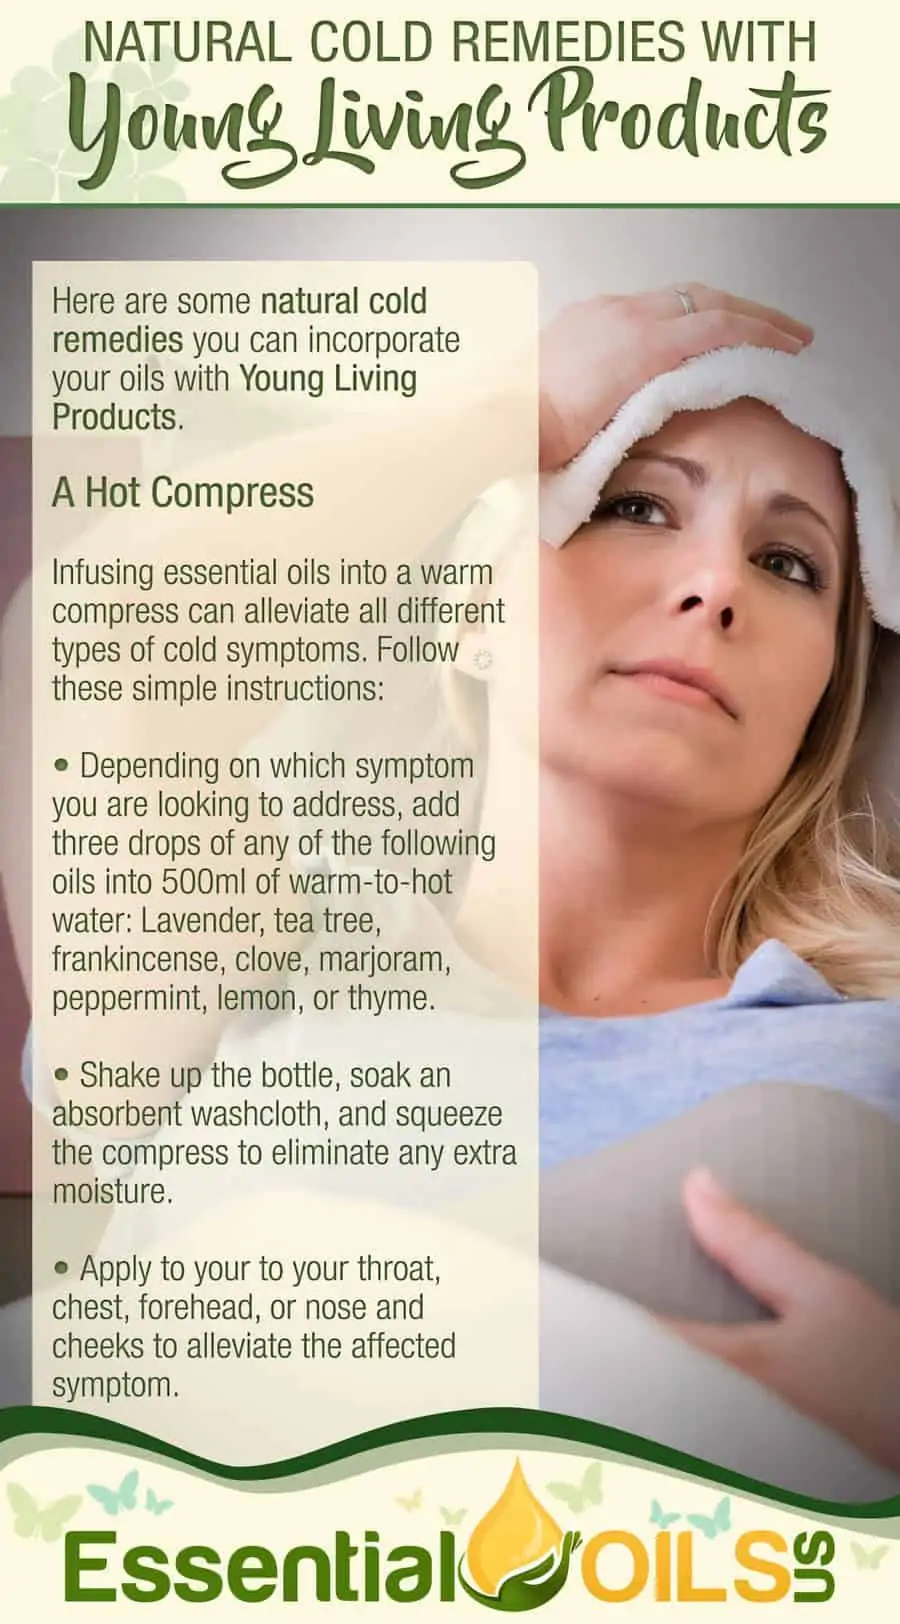 Natural Cold Remedies With Young Living - A Hot Compress